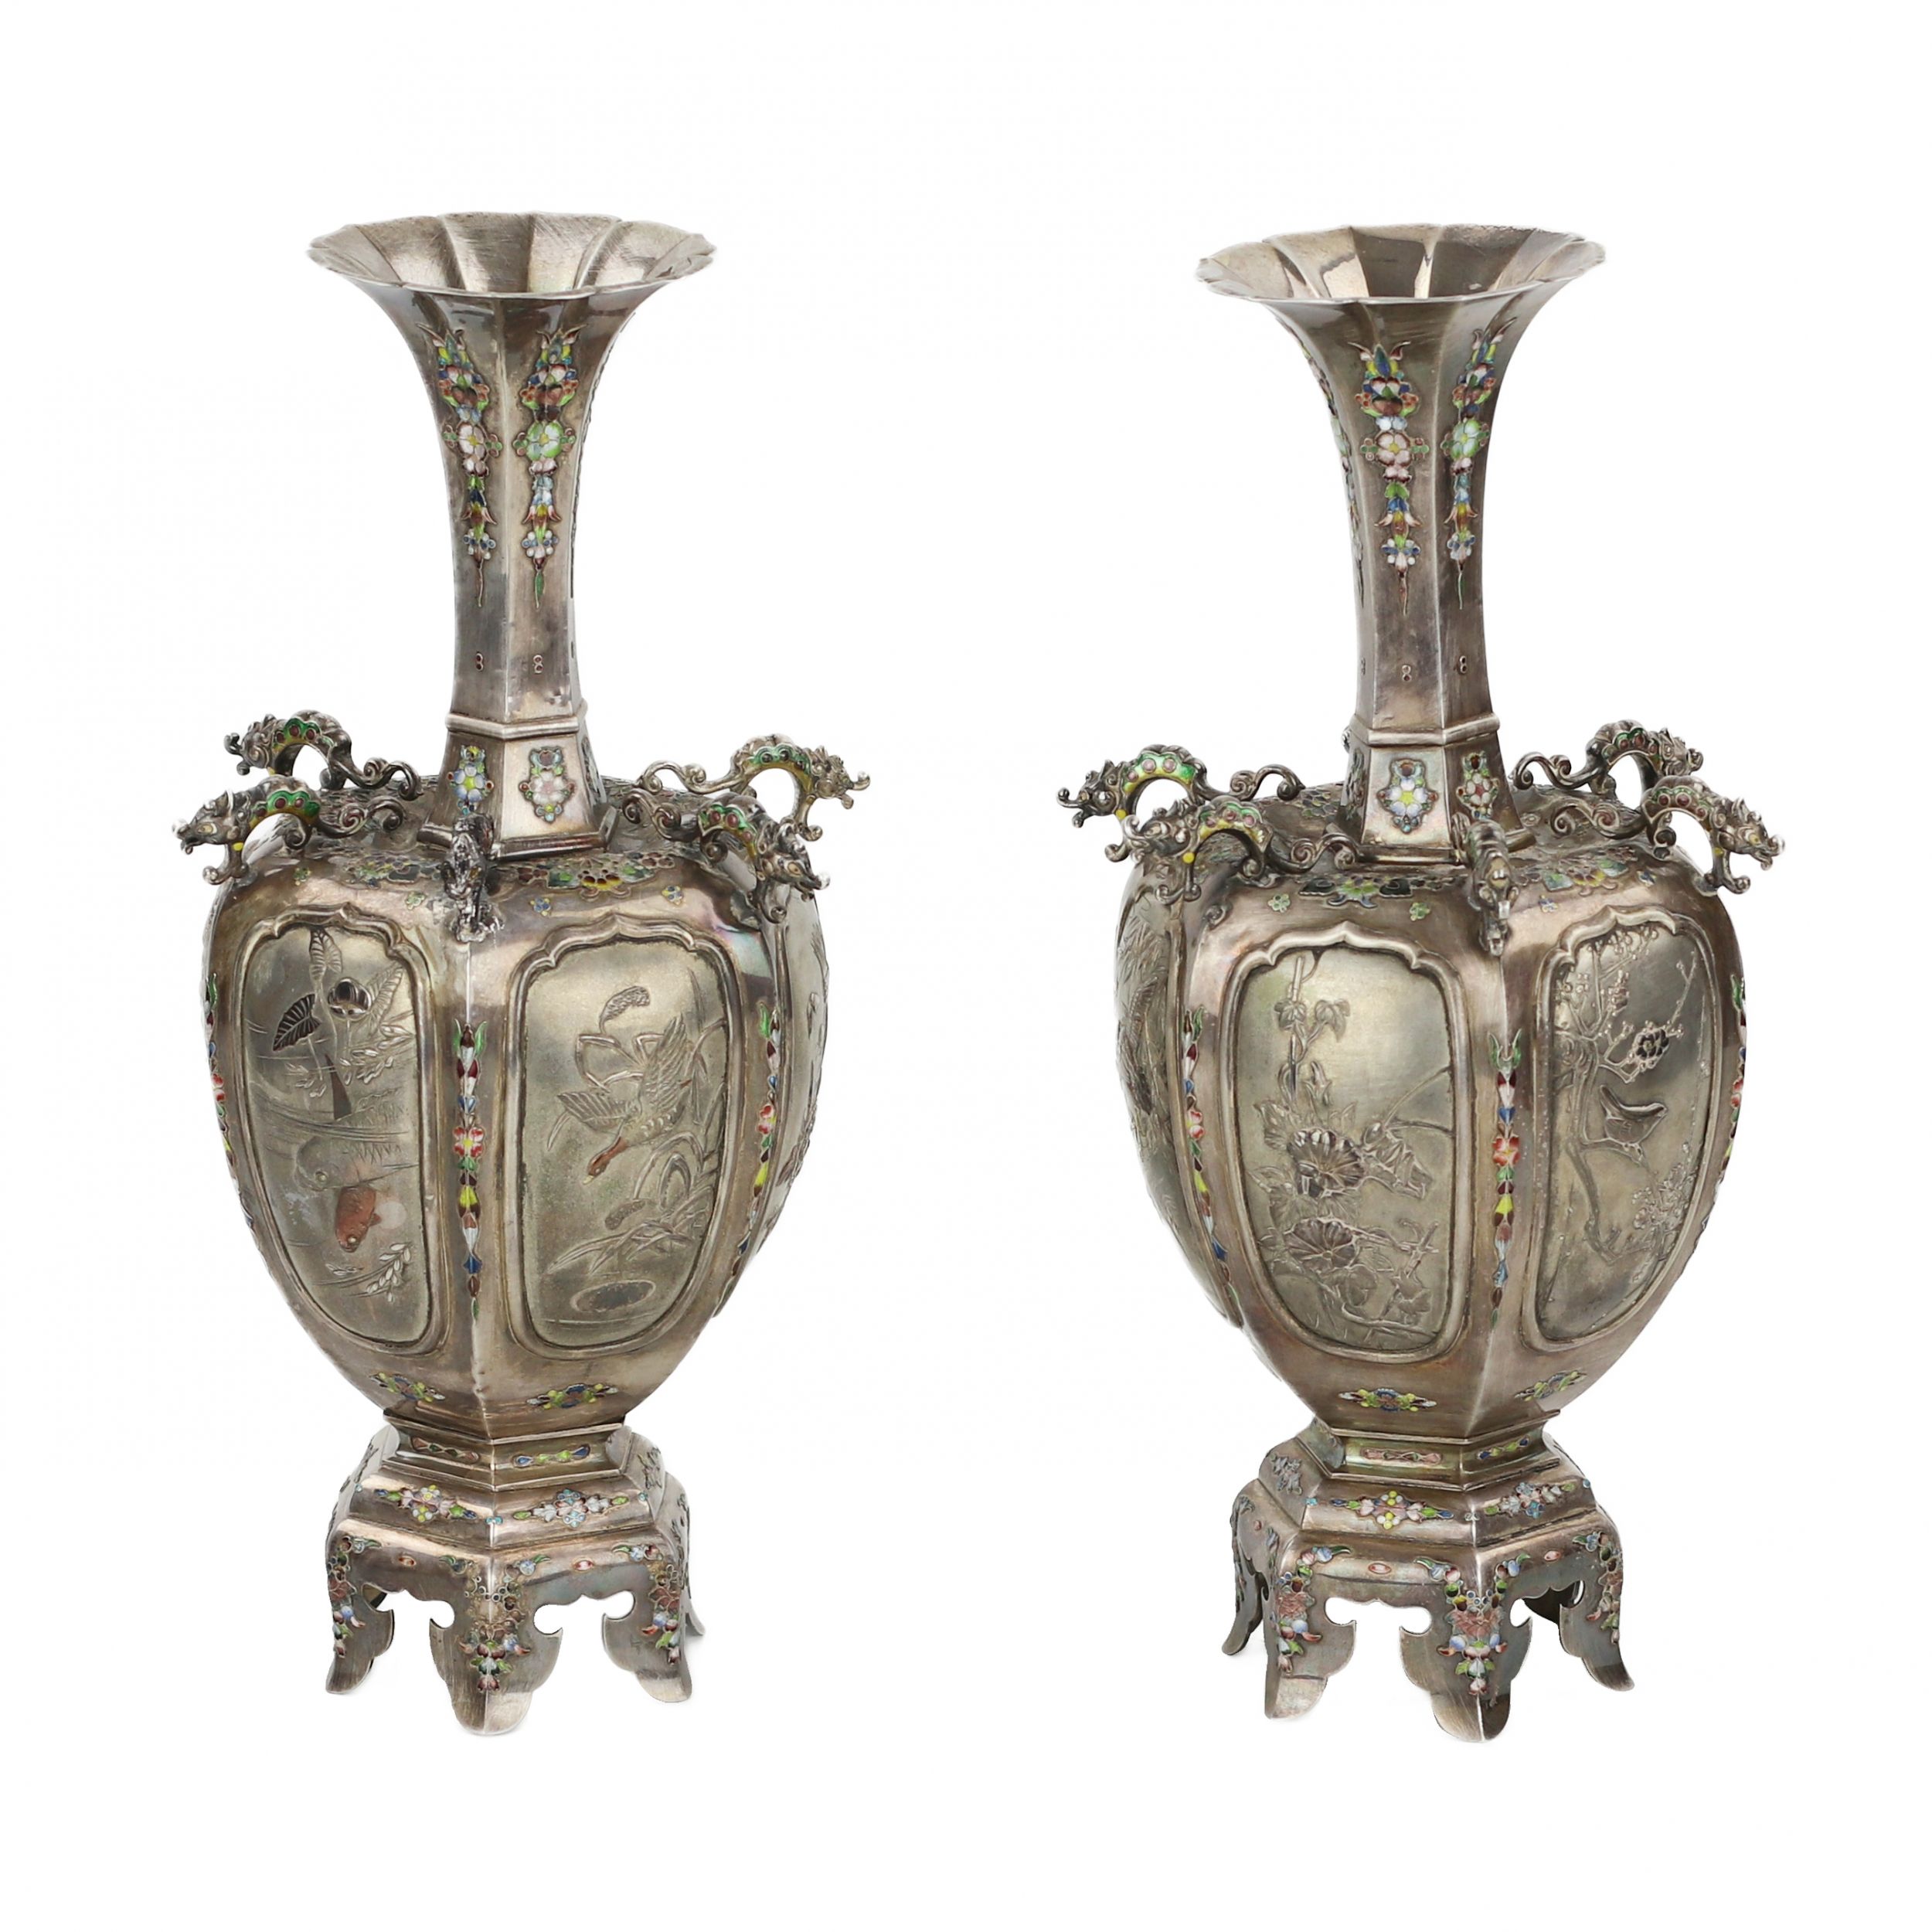 A pair of elegant Japanese vases made of silver and enamel. The turn of the 19th-20th centuries. - Image 2 of 6